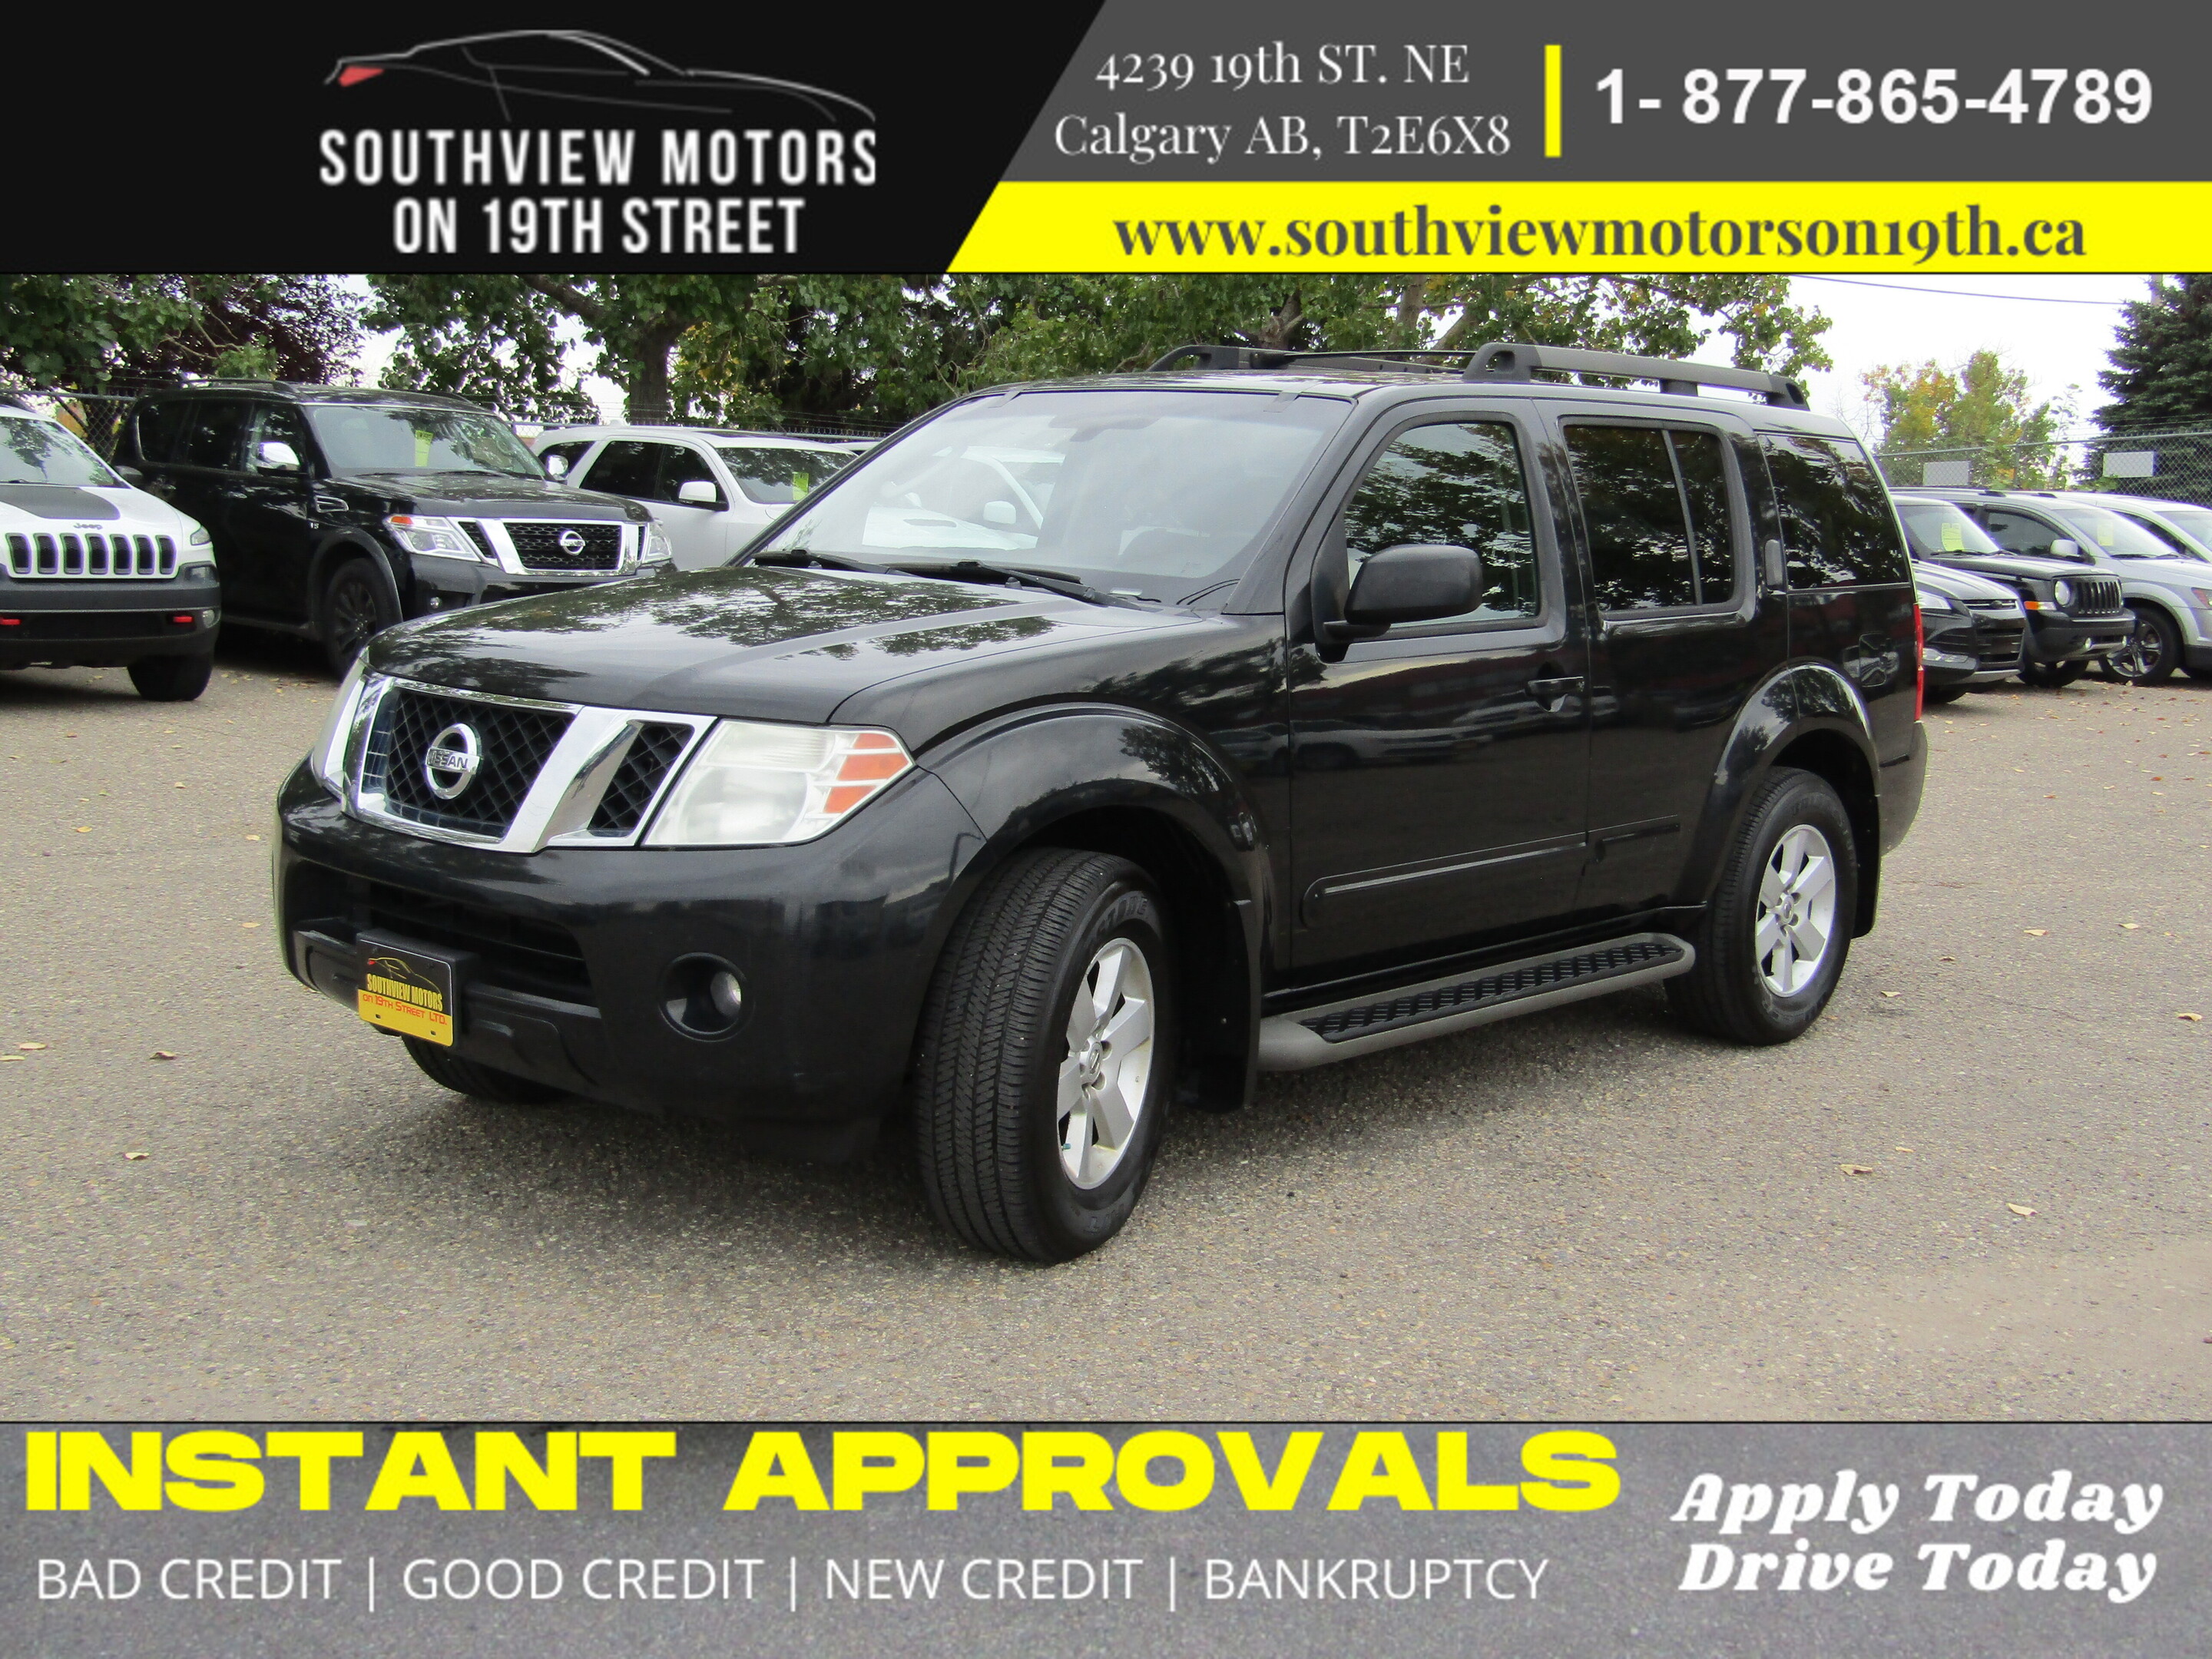 2009 Nissan Pathfinder 4X4-SUNROOF-7 PASS *FINANCING AVAILABLE*